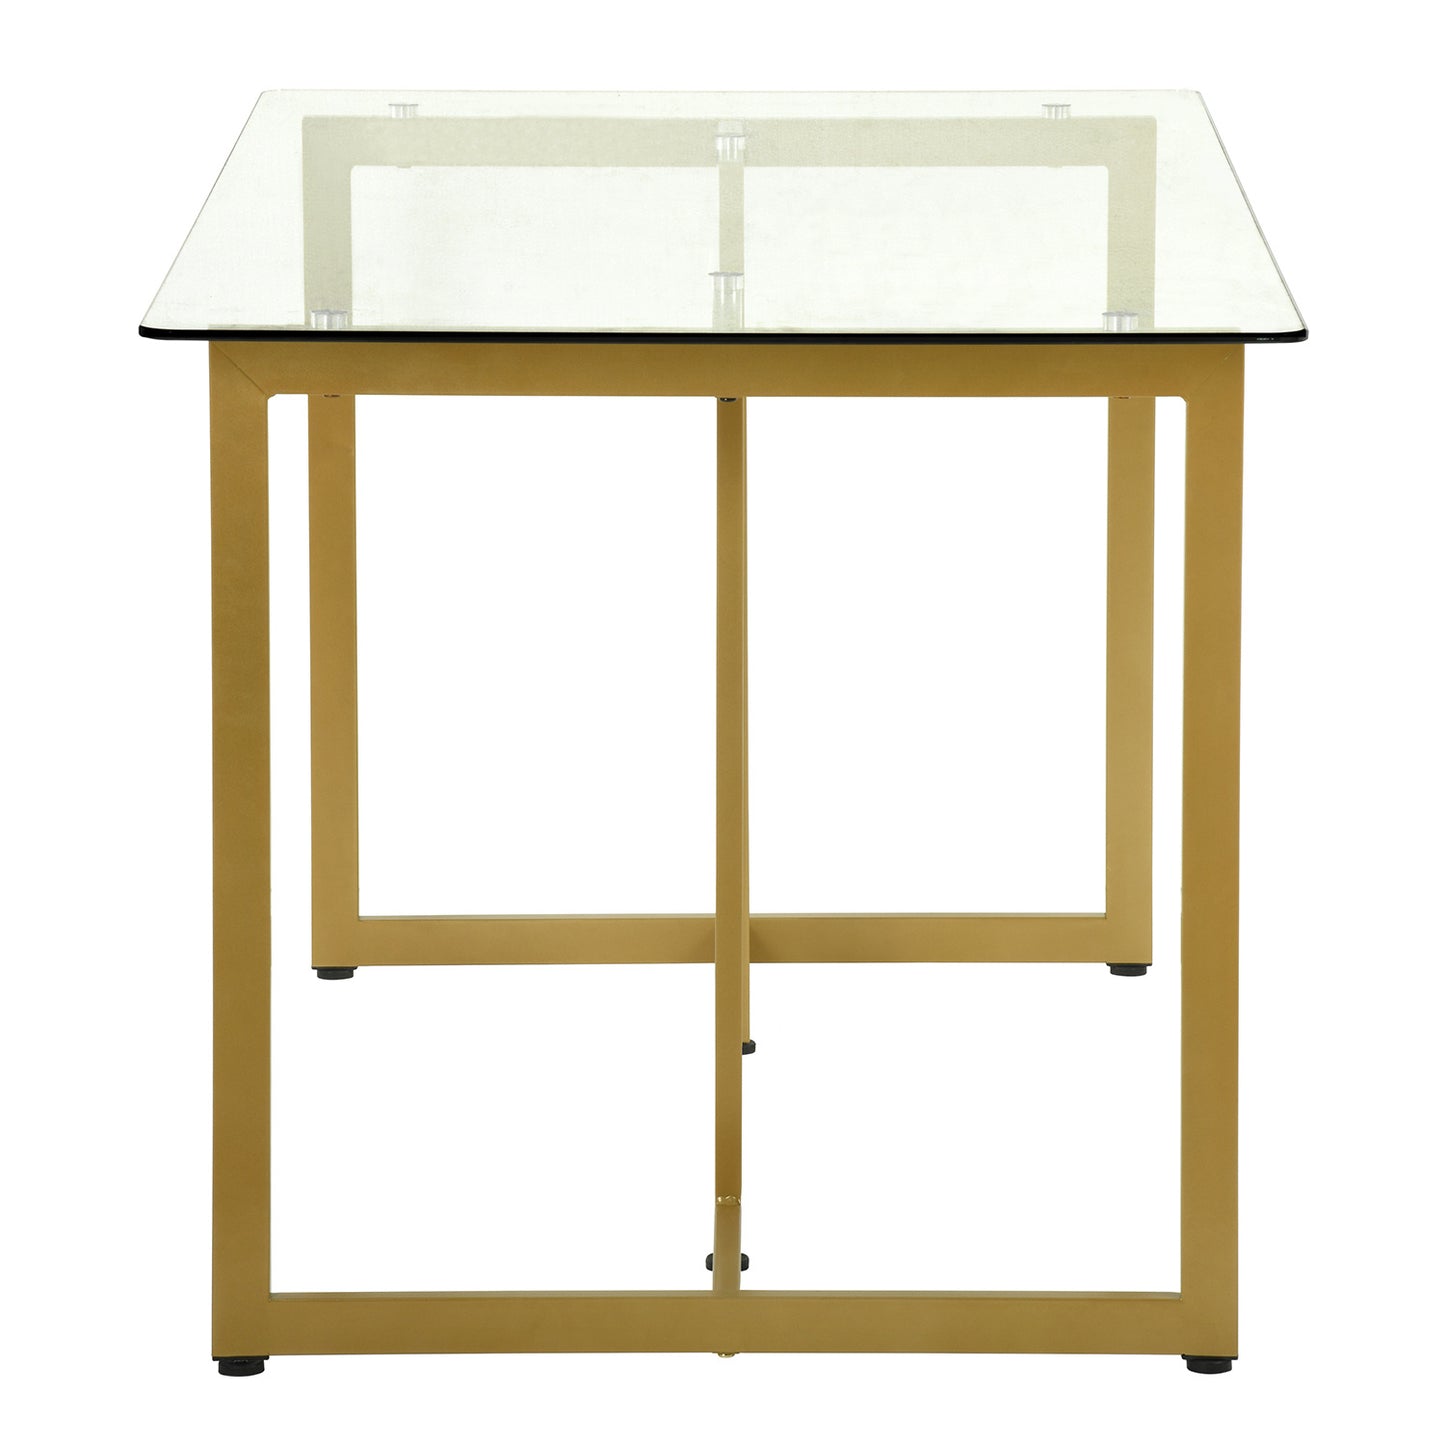 55.11'' iron dining table with tempered glass top, clear & gold